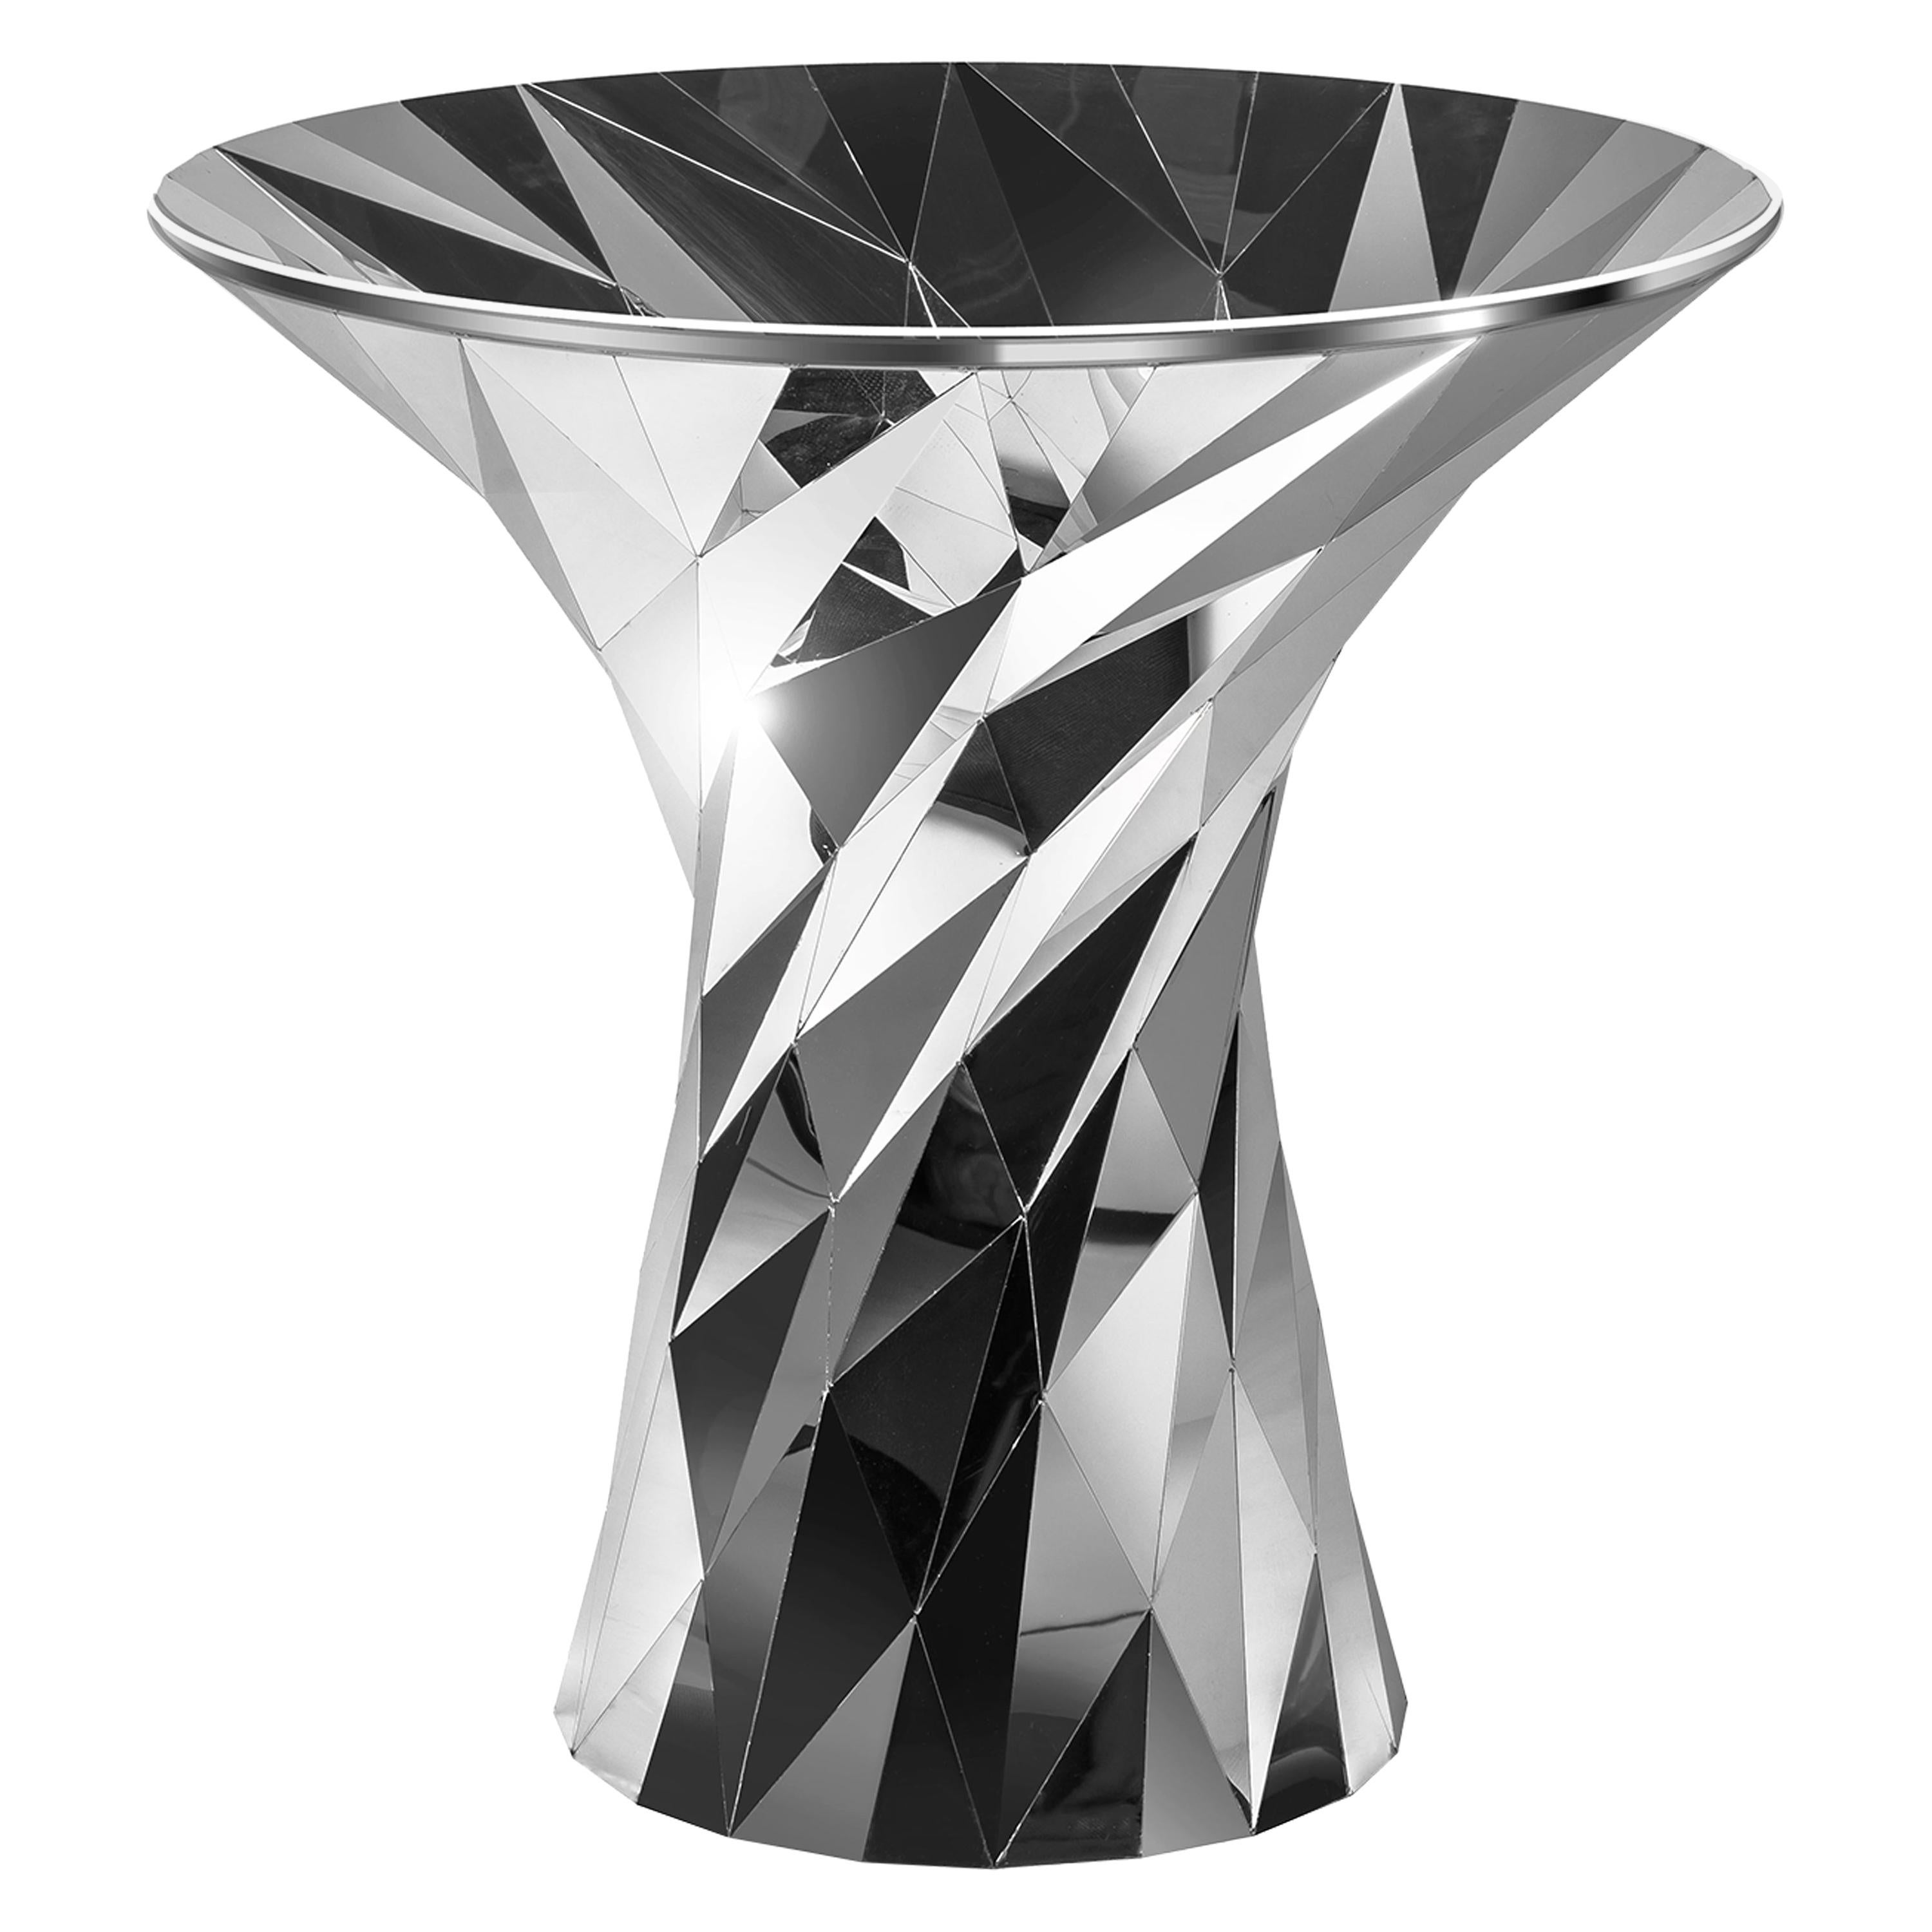 Object #MT-T1-S-S Mirror Polished Stainless Steel Table by Zhoujie Zhang For Sale